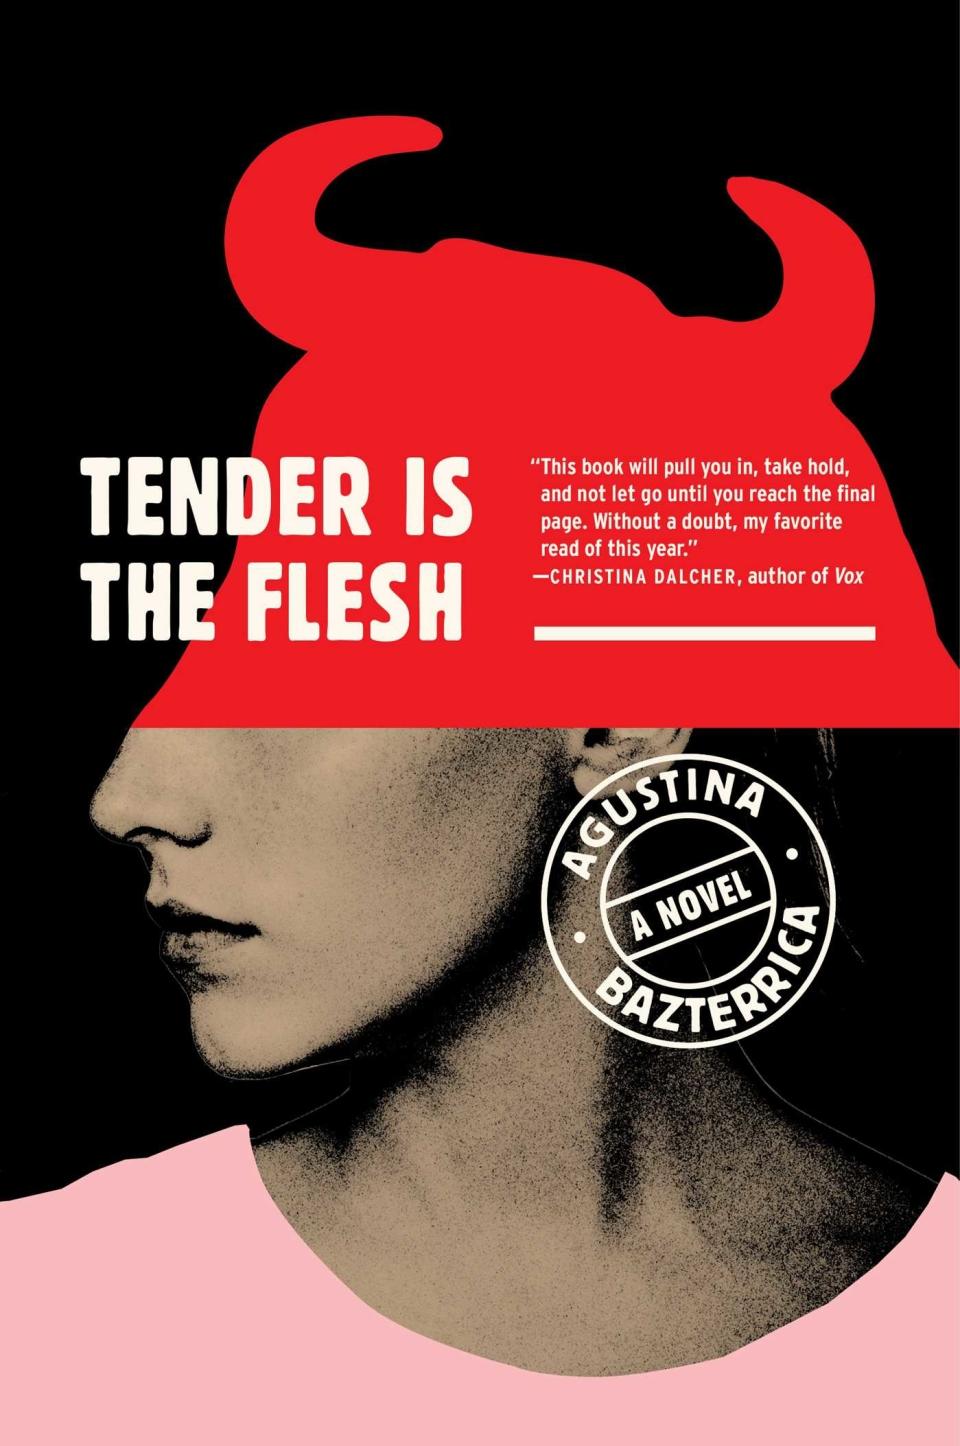 Book cover of "Tender is the Flesh" by Agustina Bazterrica with a partial profile of a person and novel's title in stylized text